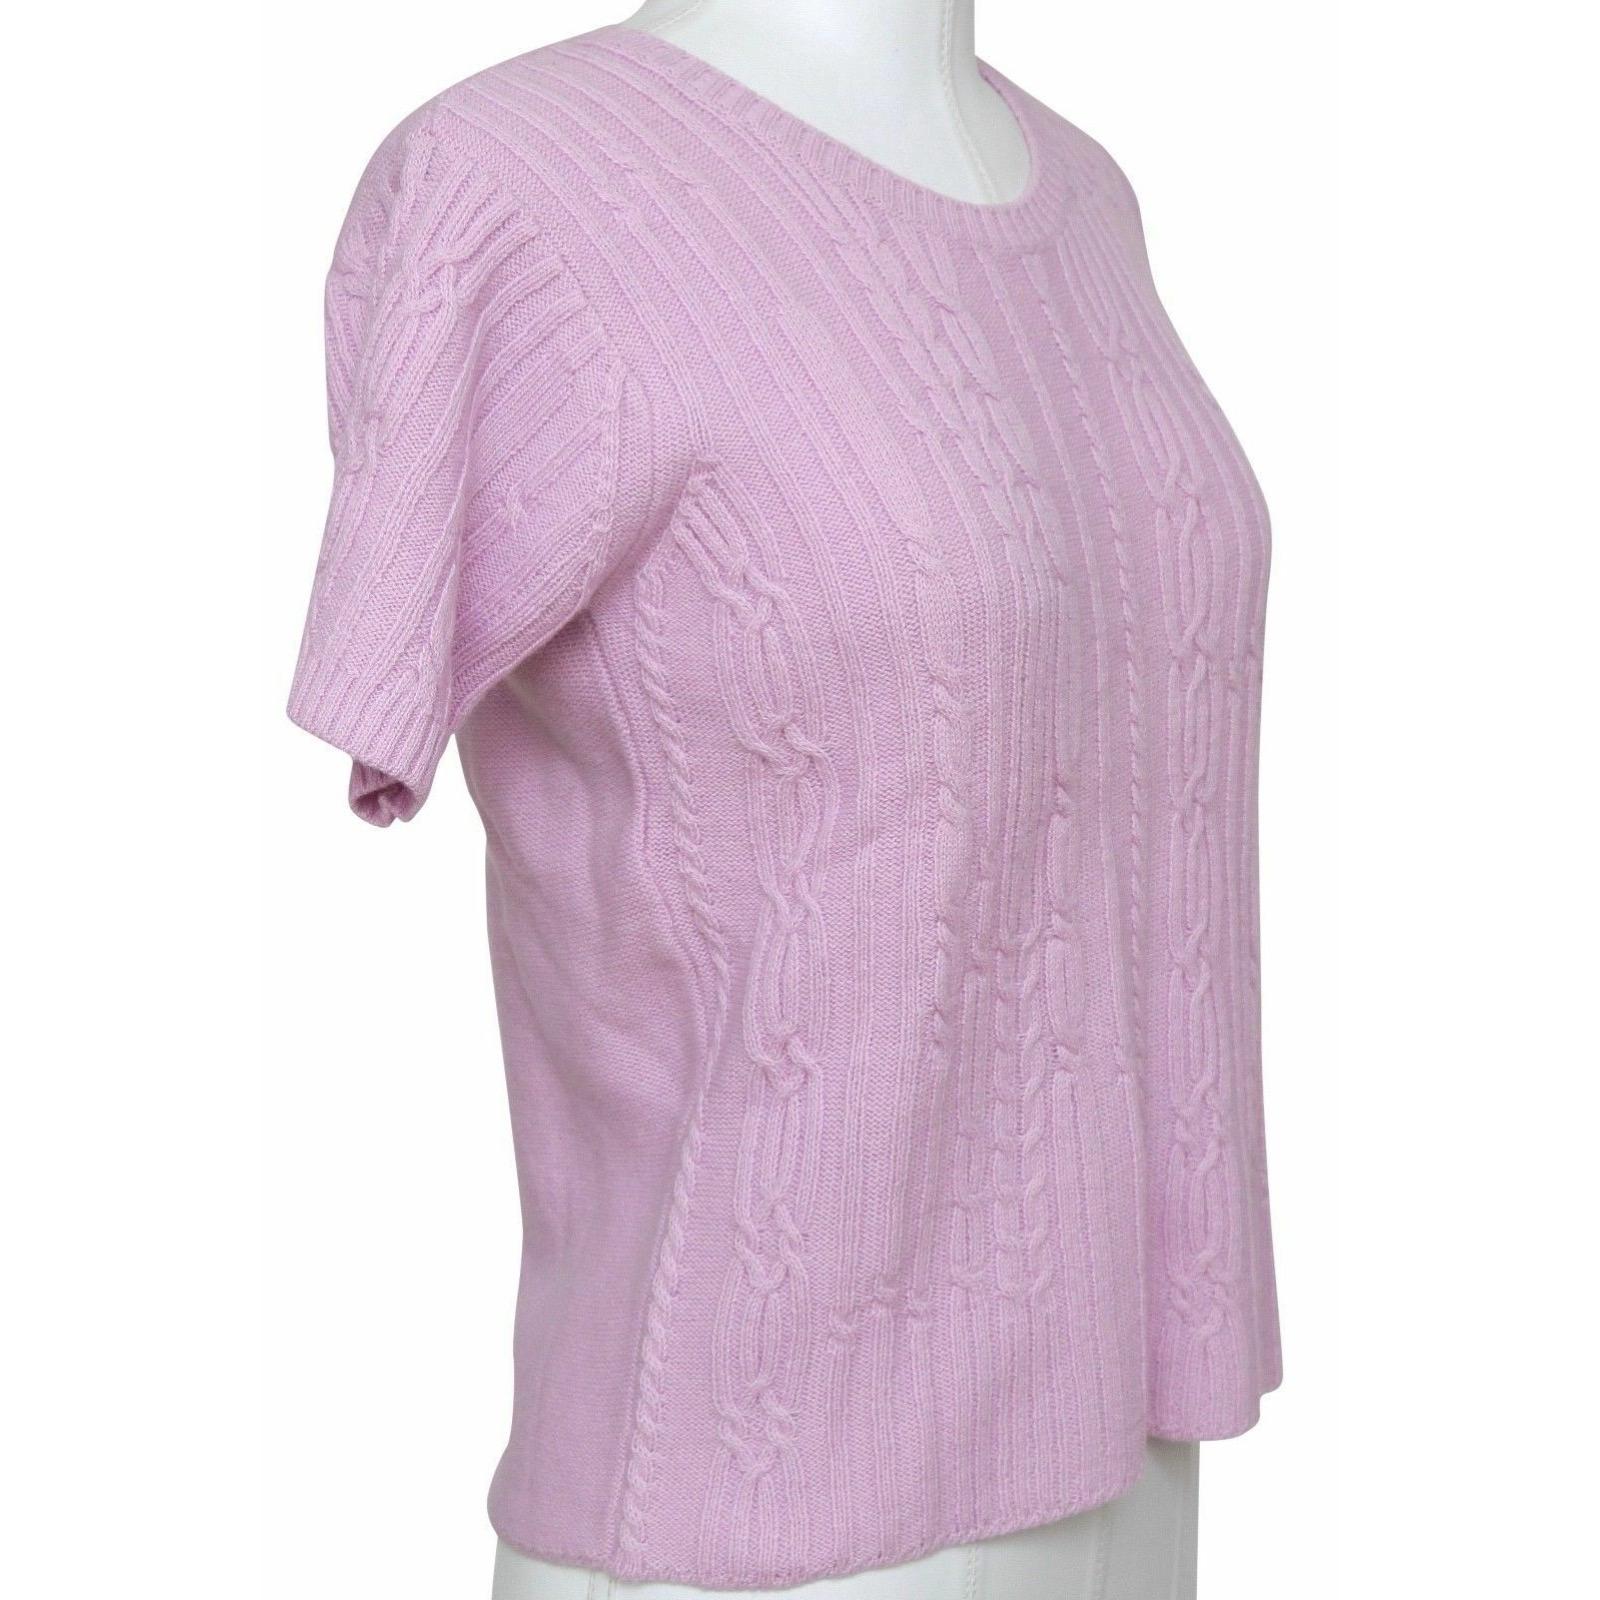 GUARANTEED AUTHENTIC CHLOE PINK SHORT SLEEVE WOOL SWEATER

Design:
- Beautiful pink wool cable knit sweater.
- Short sleeve.
- Crewneck.
- Slip on.

Size: S

Material: 100% Wool

Measurements (Approximate laid flat, material has give):
- Shoulder to